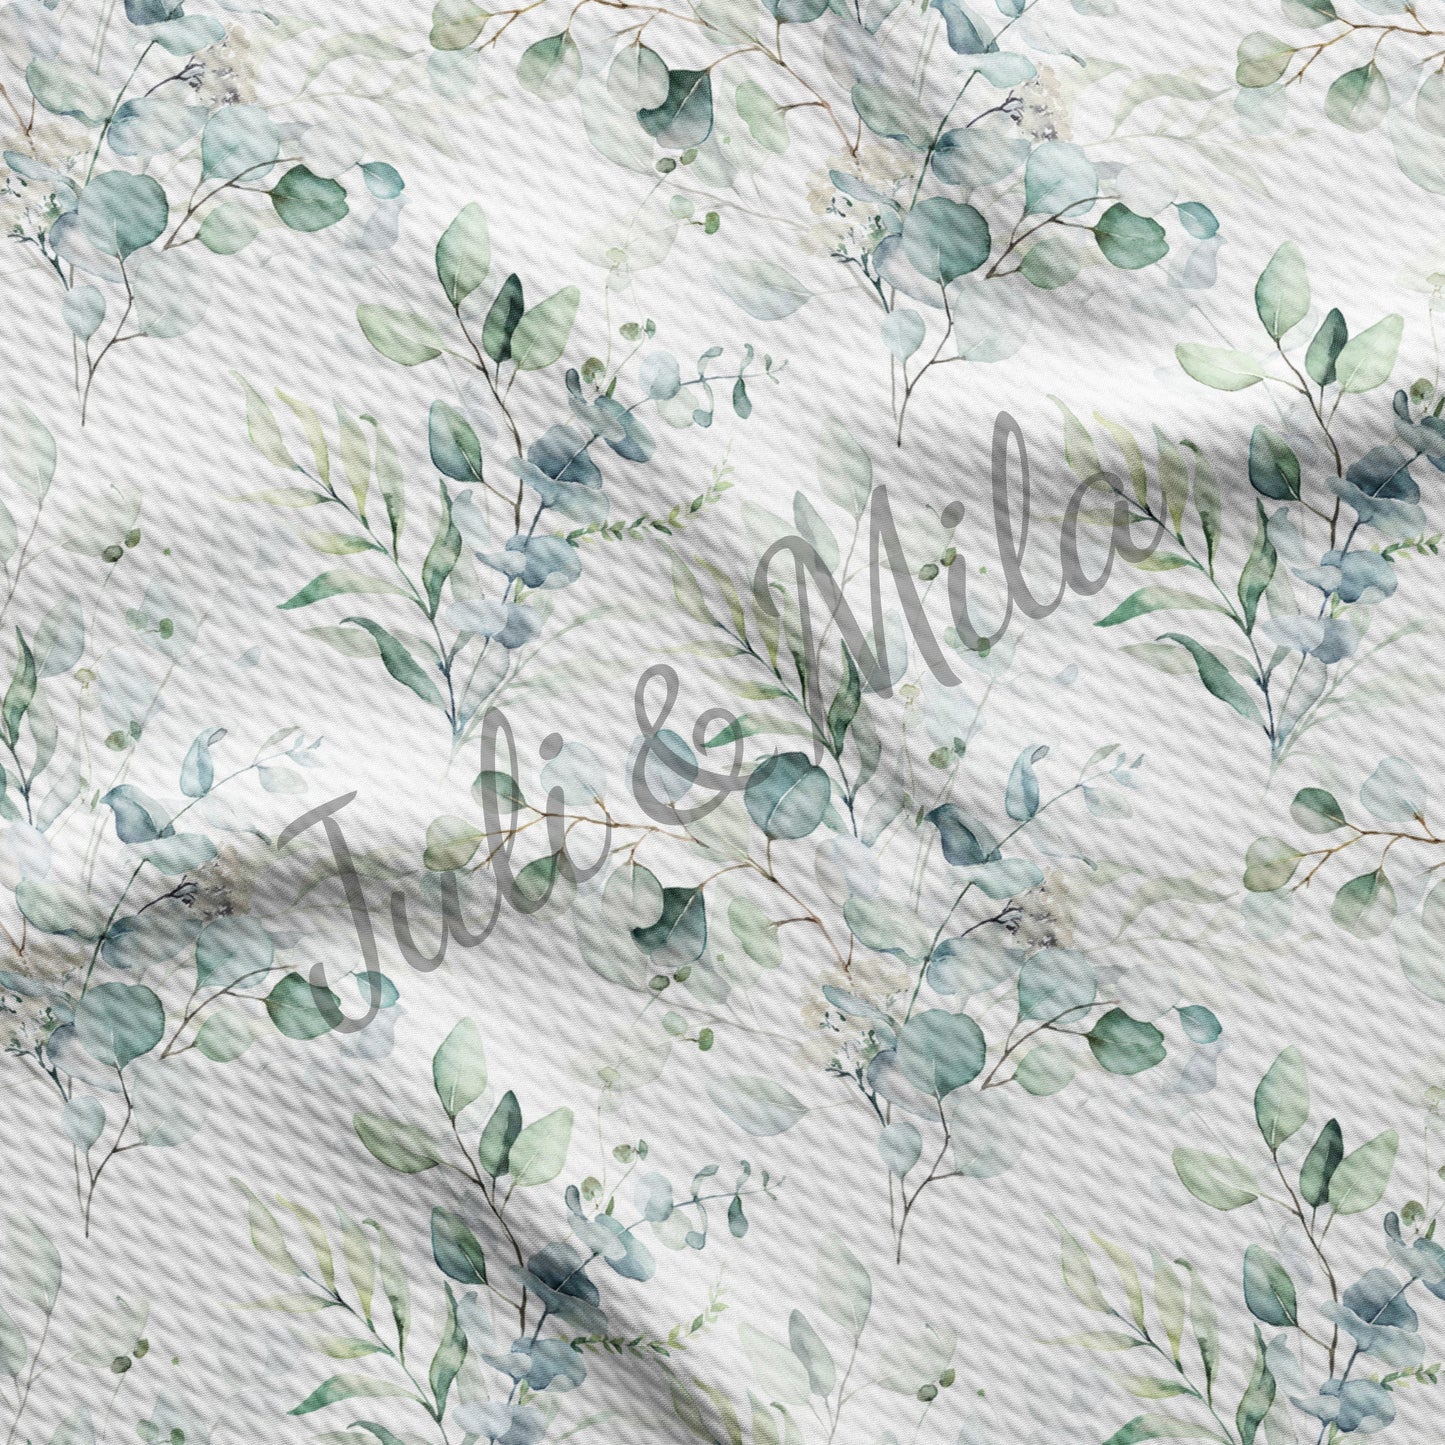 Printed Floral Bullet Textured Fabric  Greenery (F11)